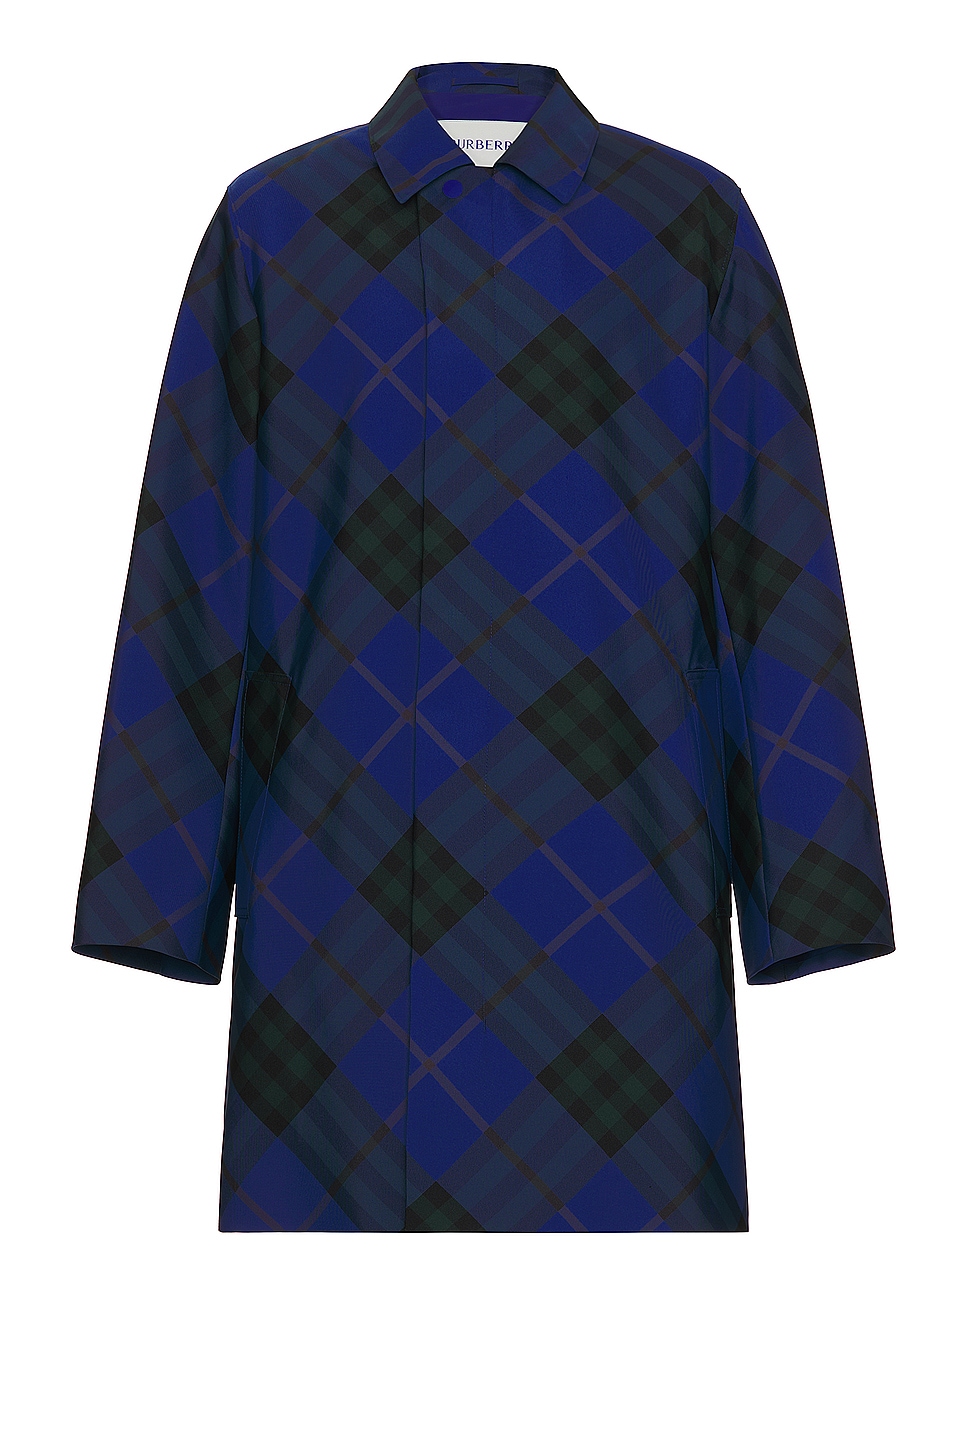 Image 1 of Burberry Check Pattern Coat in Knight Ip Check